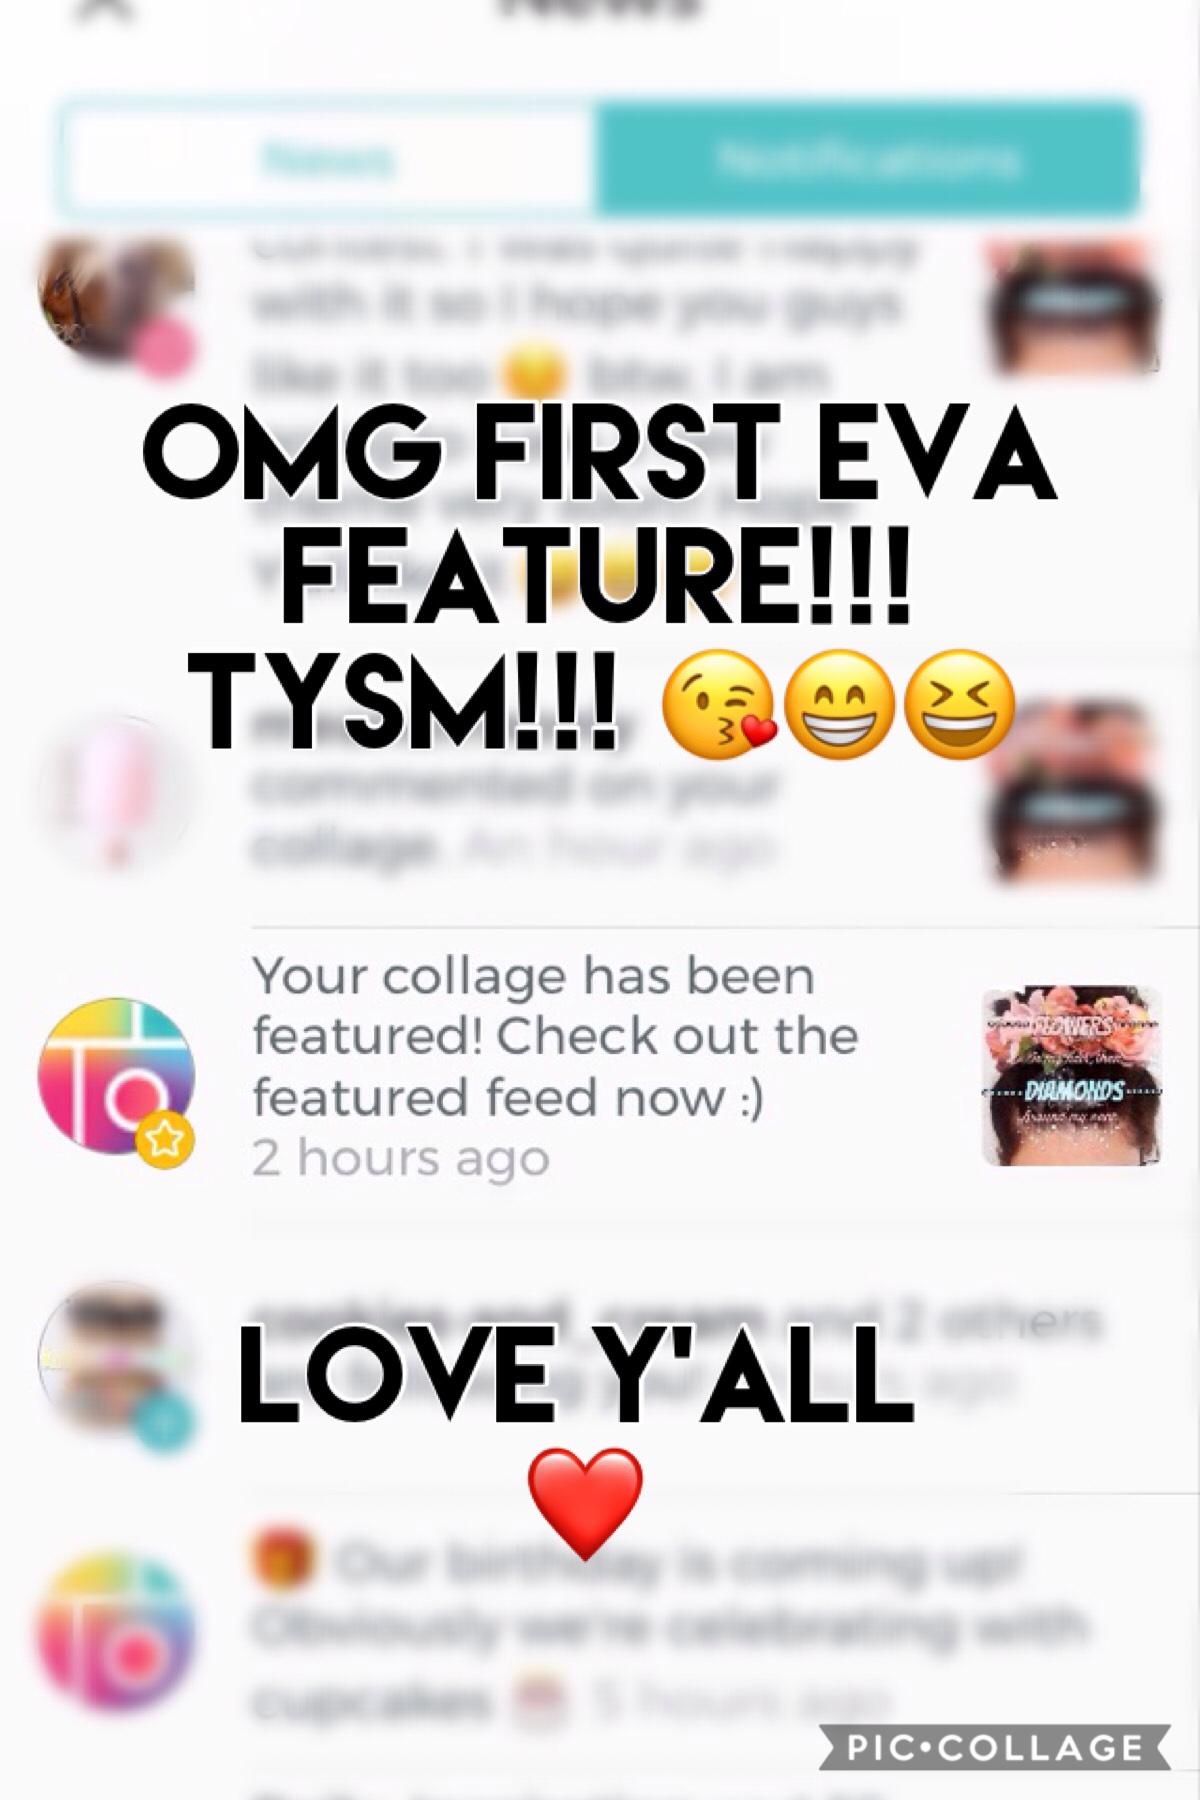 yaaaaay! TYSM❤️

Thanks for all the support and pic collage for giving me the feature witch I really appreciate ☺️

Tysm everyone!!!!!
Peace out ✌️ lol 😂 